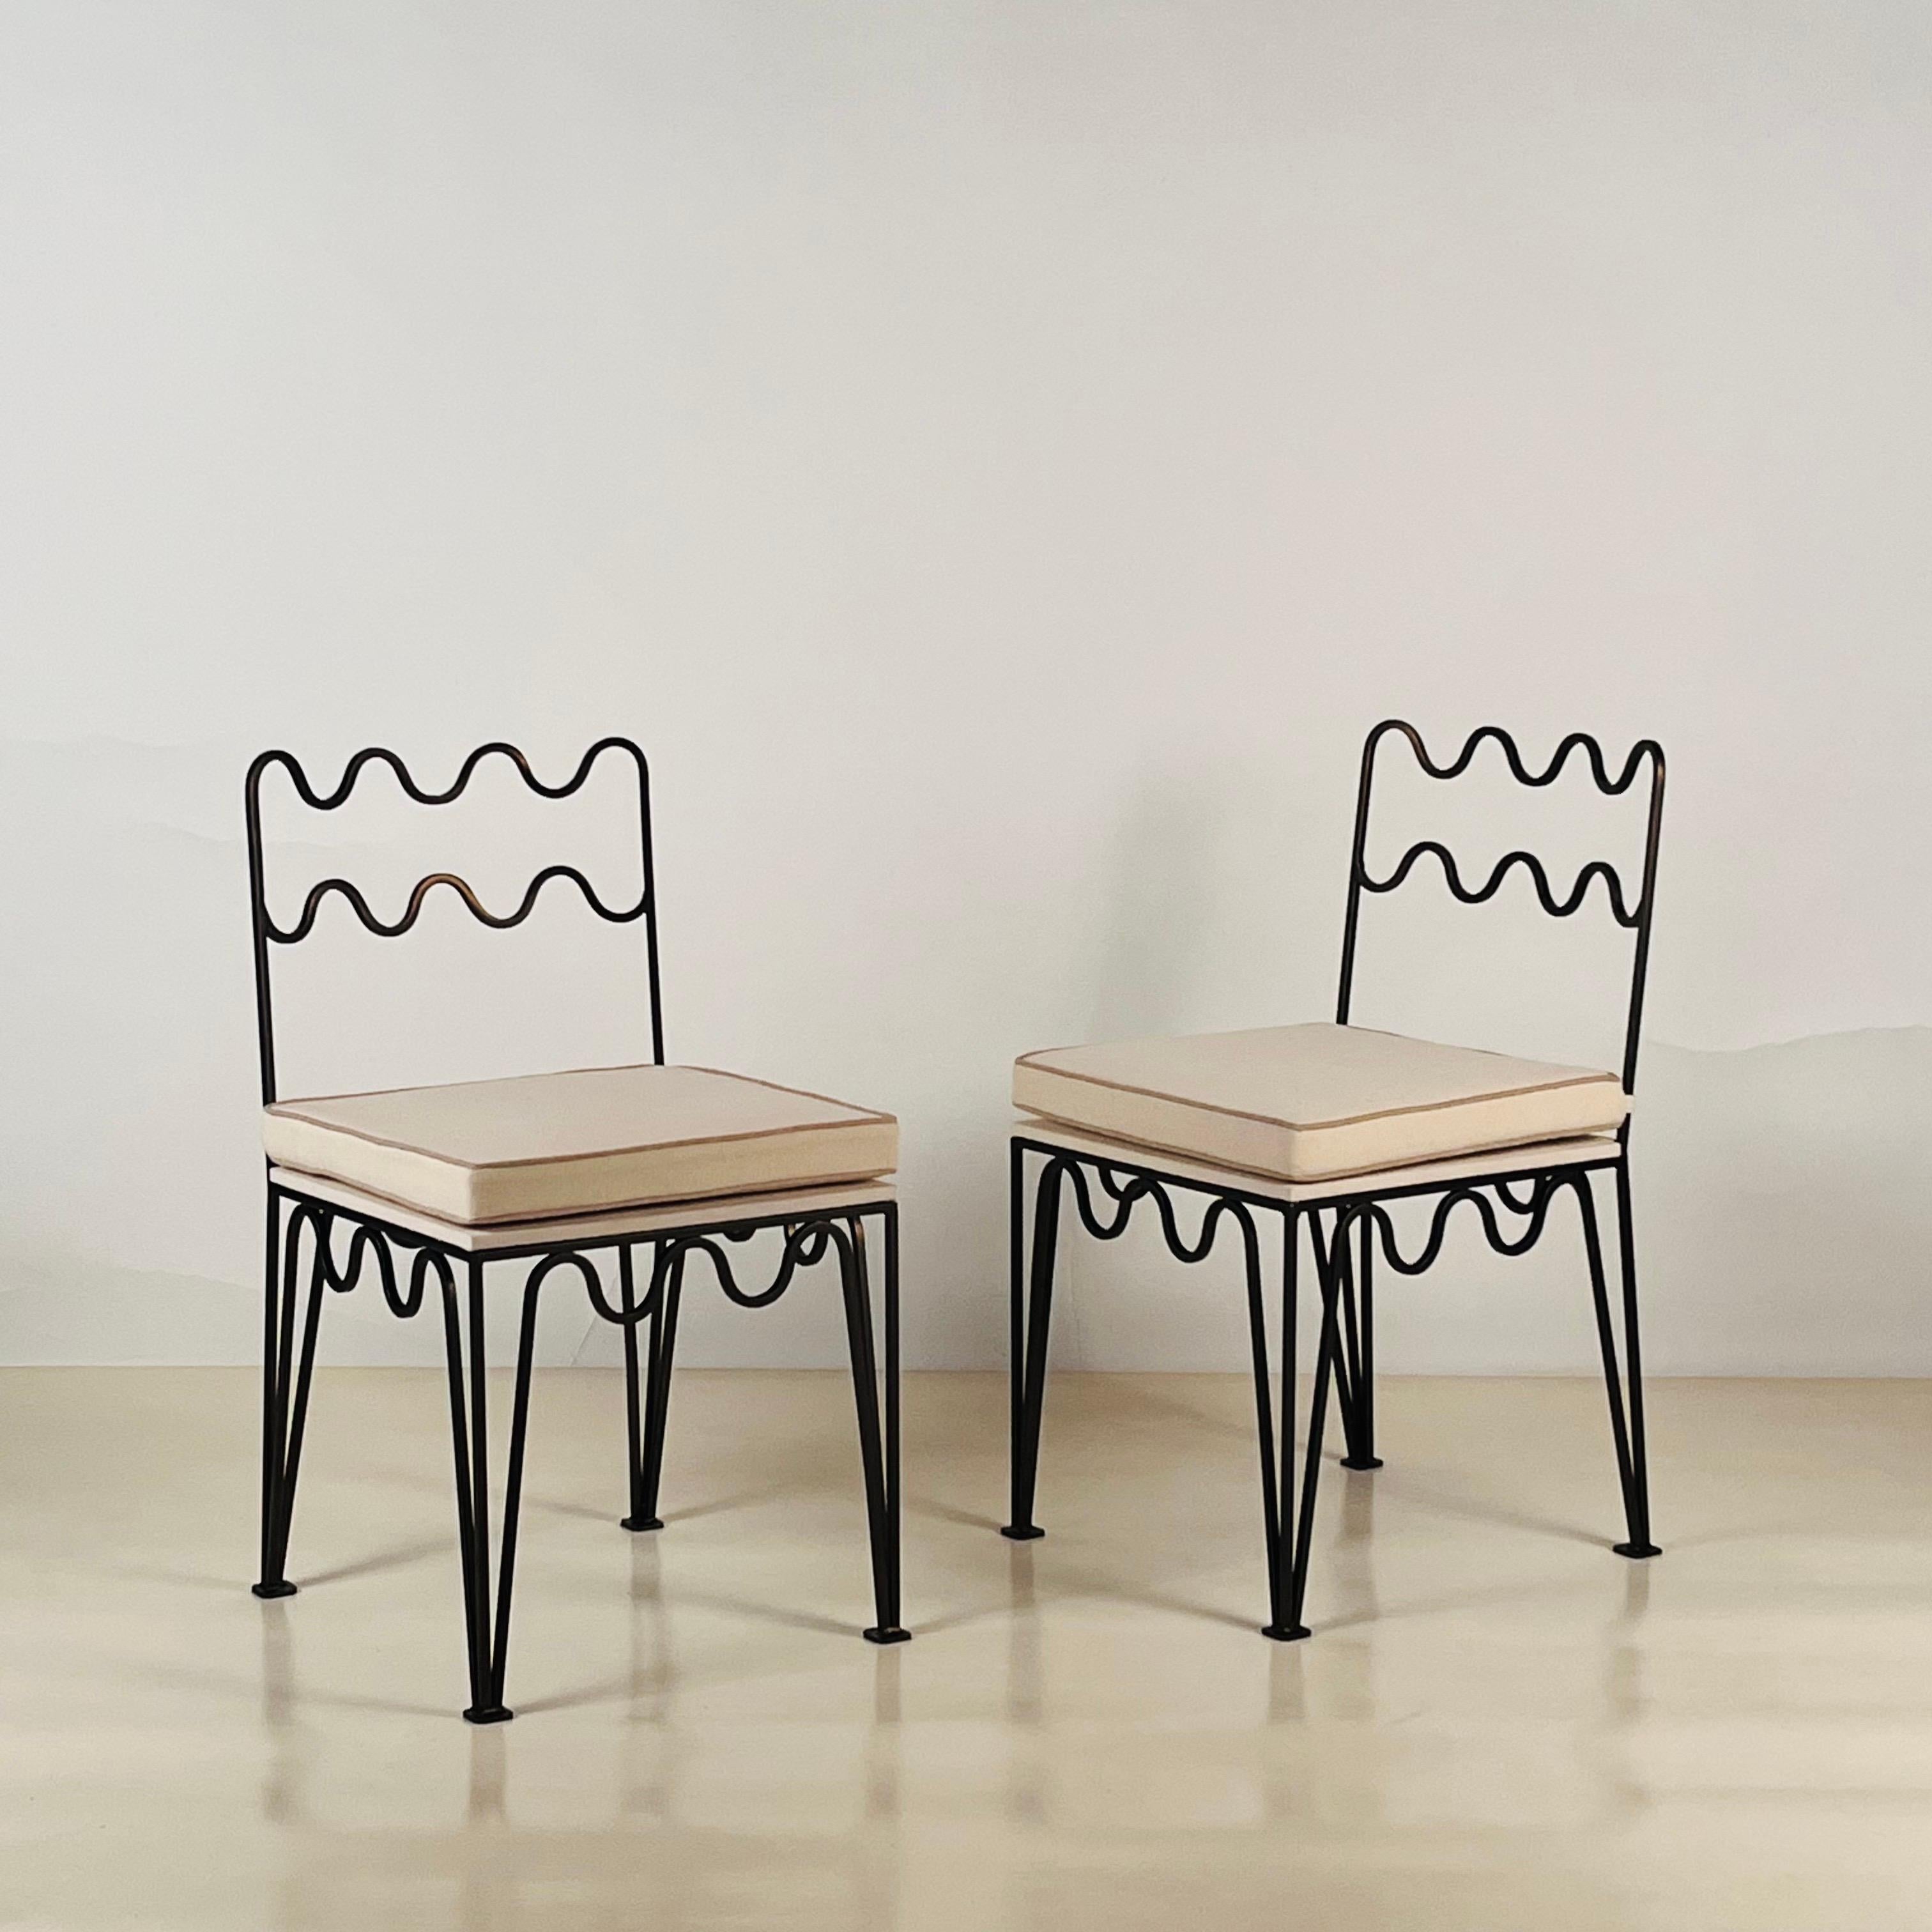 Pair of Méandre™ dark bronze side chairs by DESIGN FRÈRES®.

Chic and understated.

